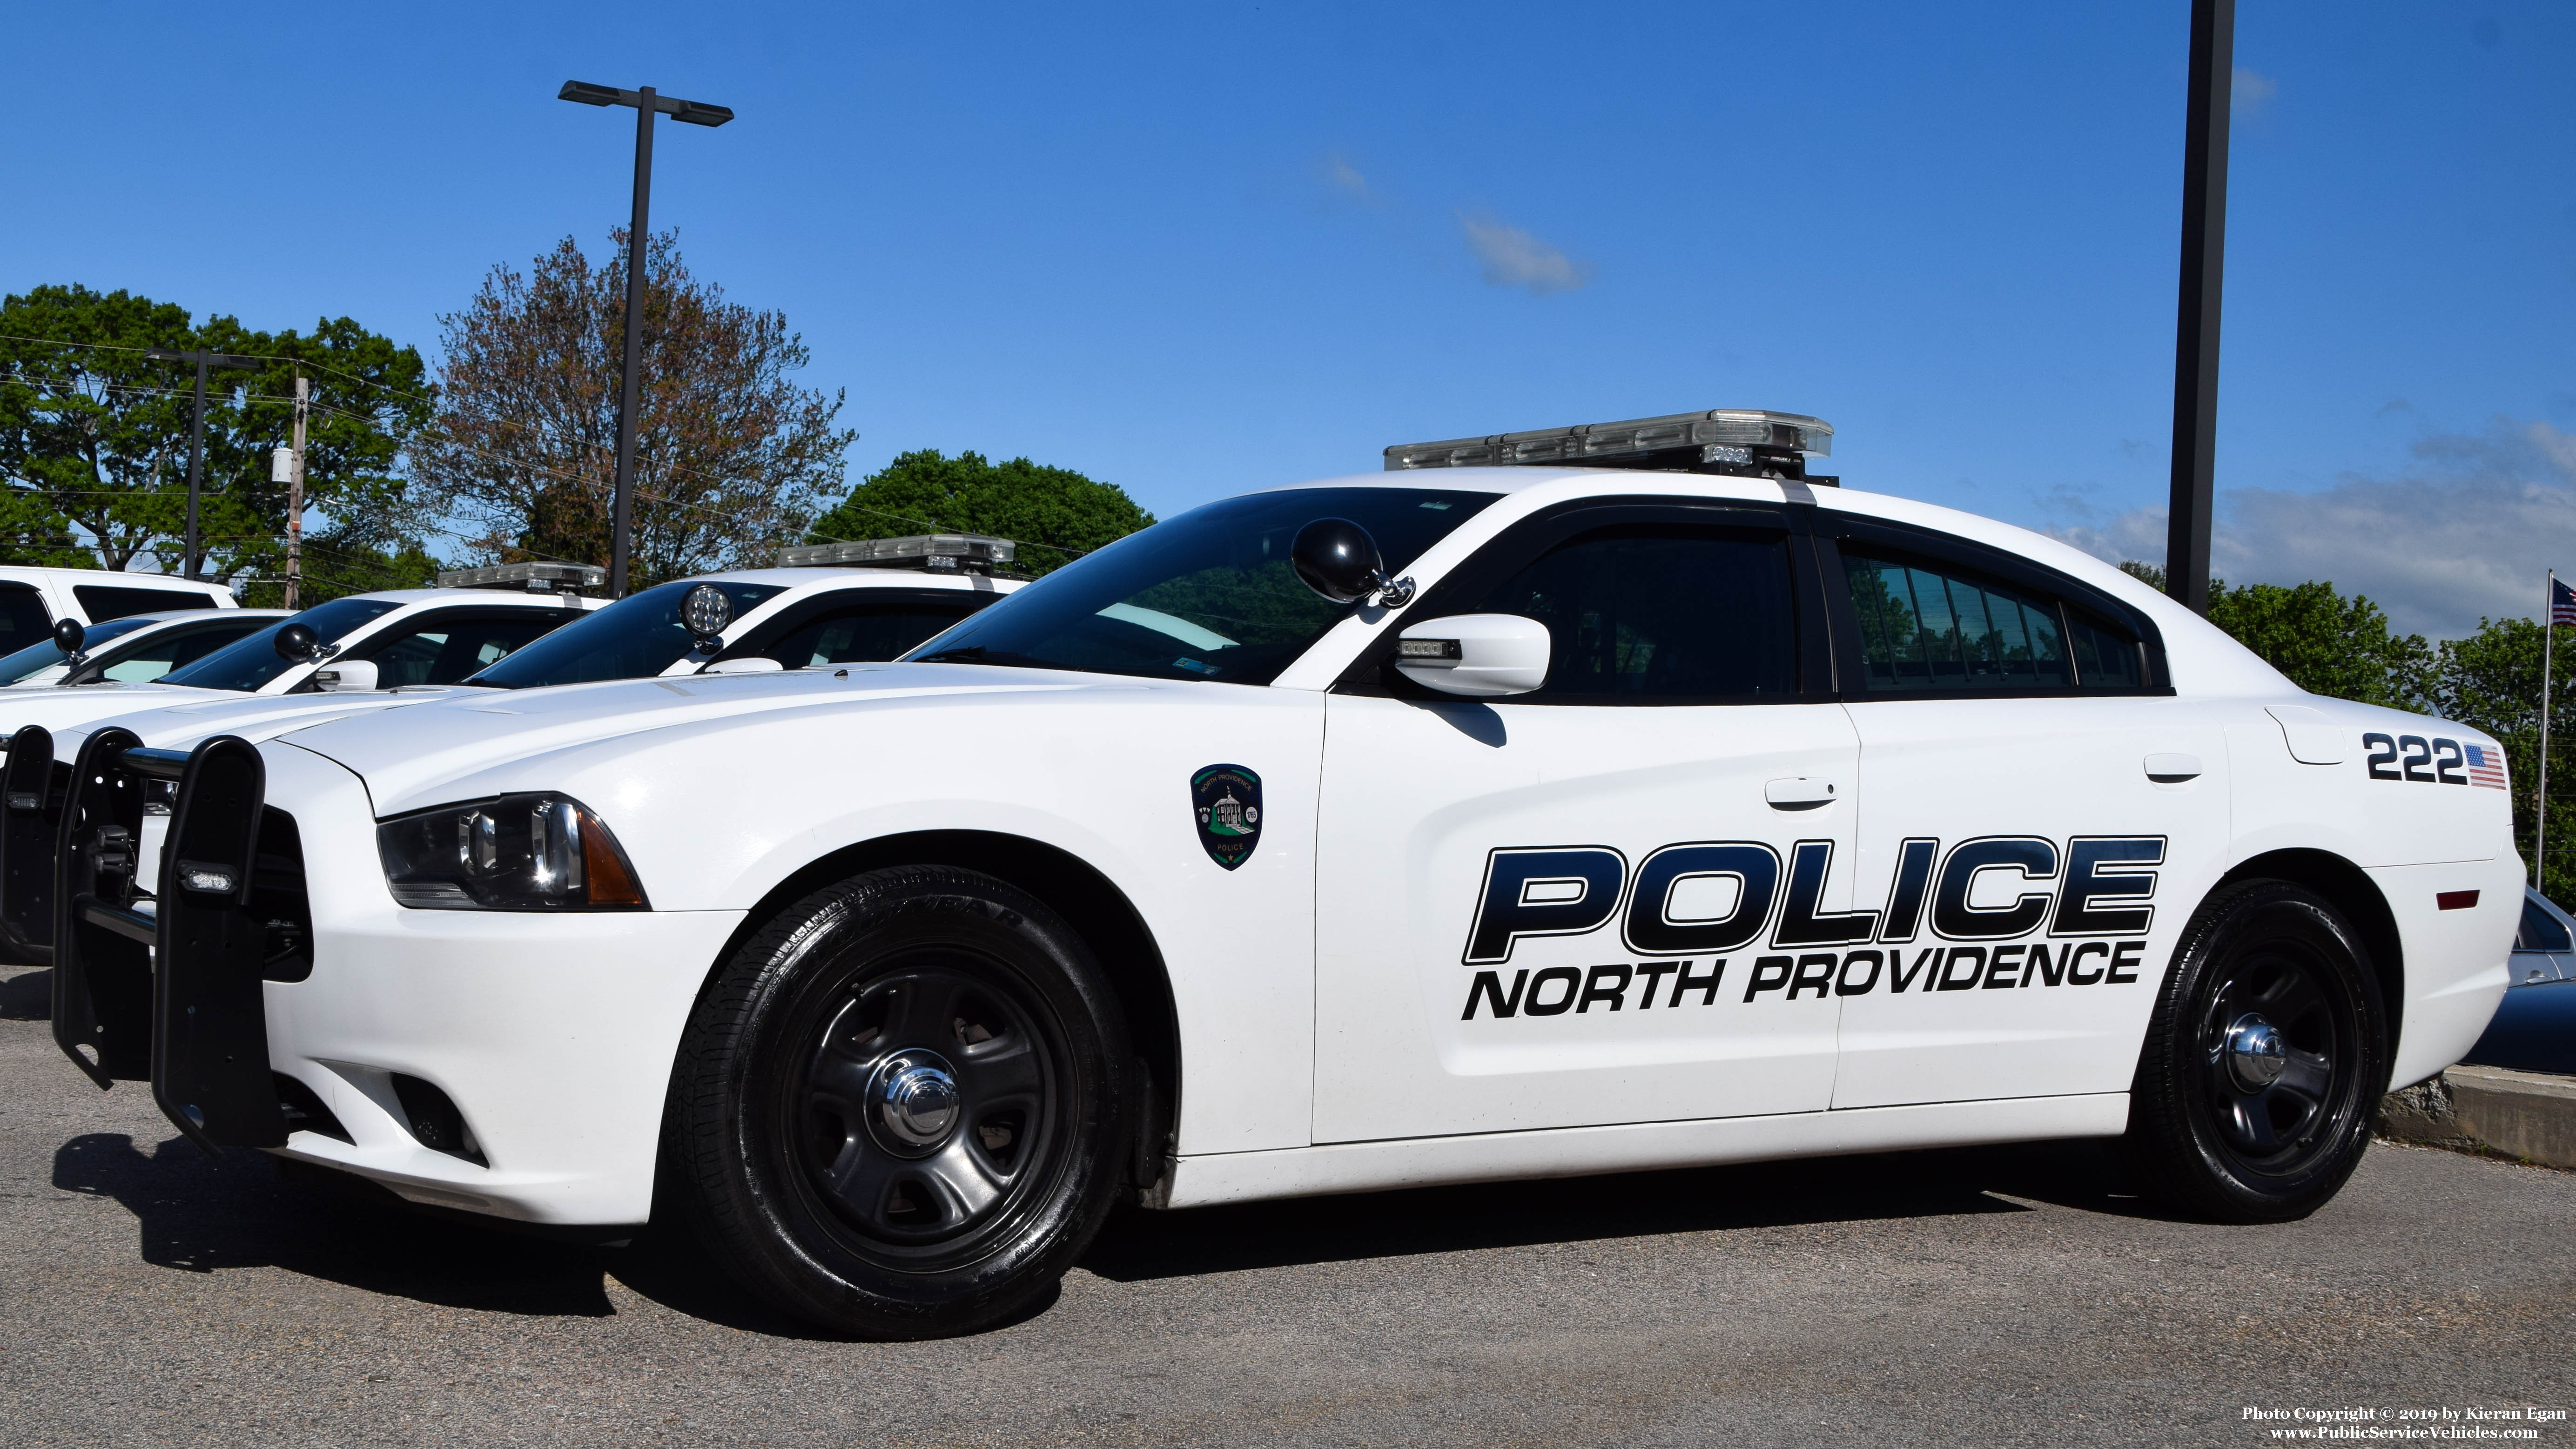 A photo  of North Providence Police
            Cruiser 222, a 2013 Dodge Charger             taken by Kieran Egan